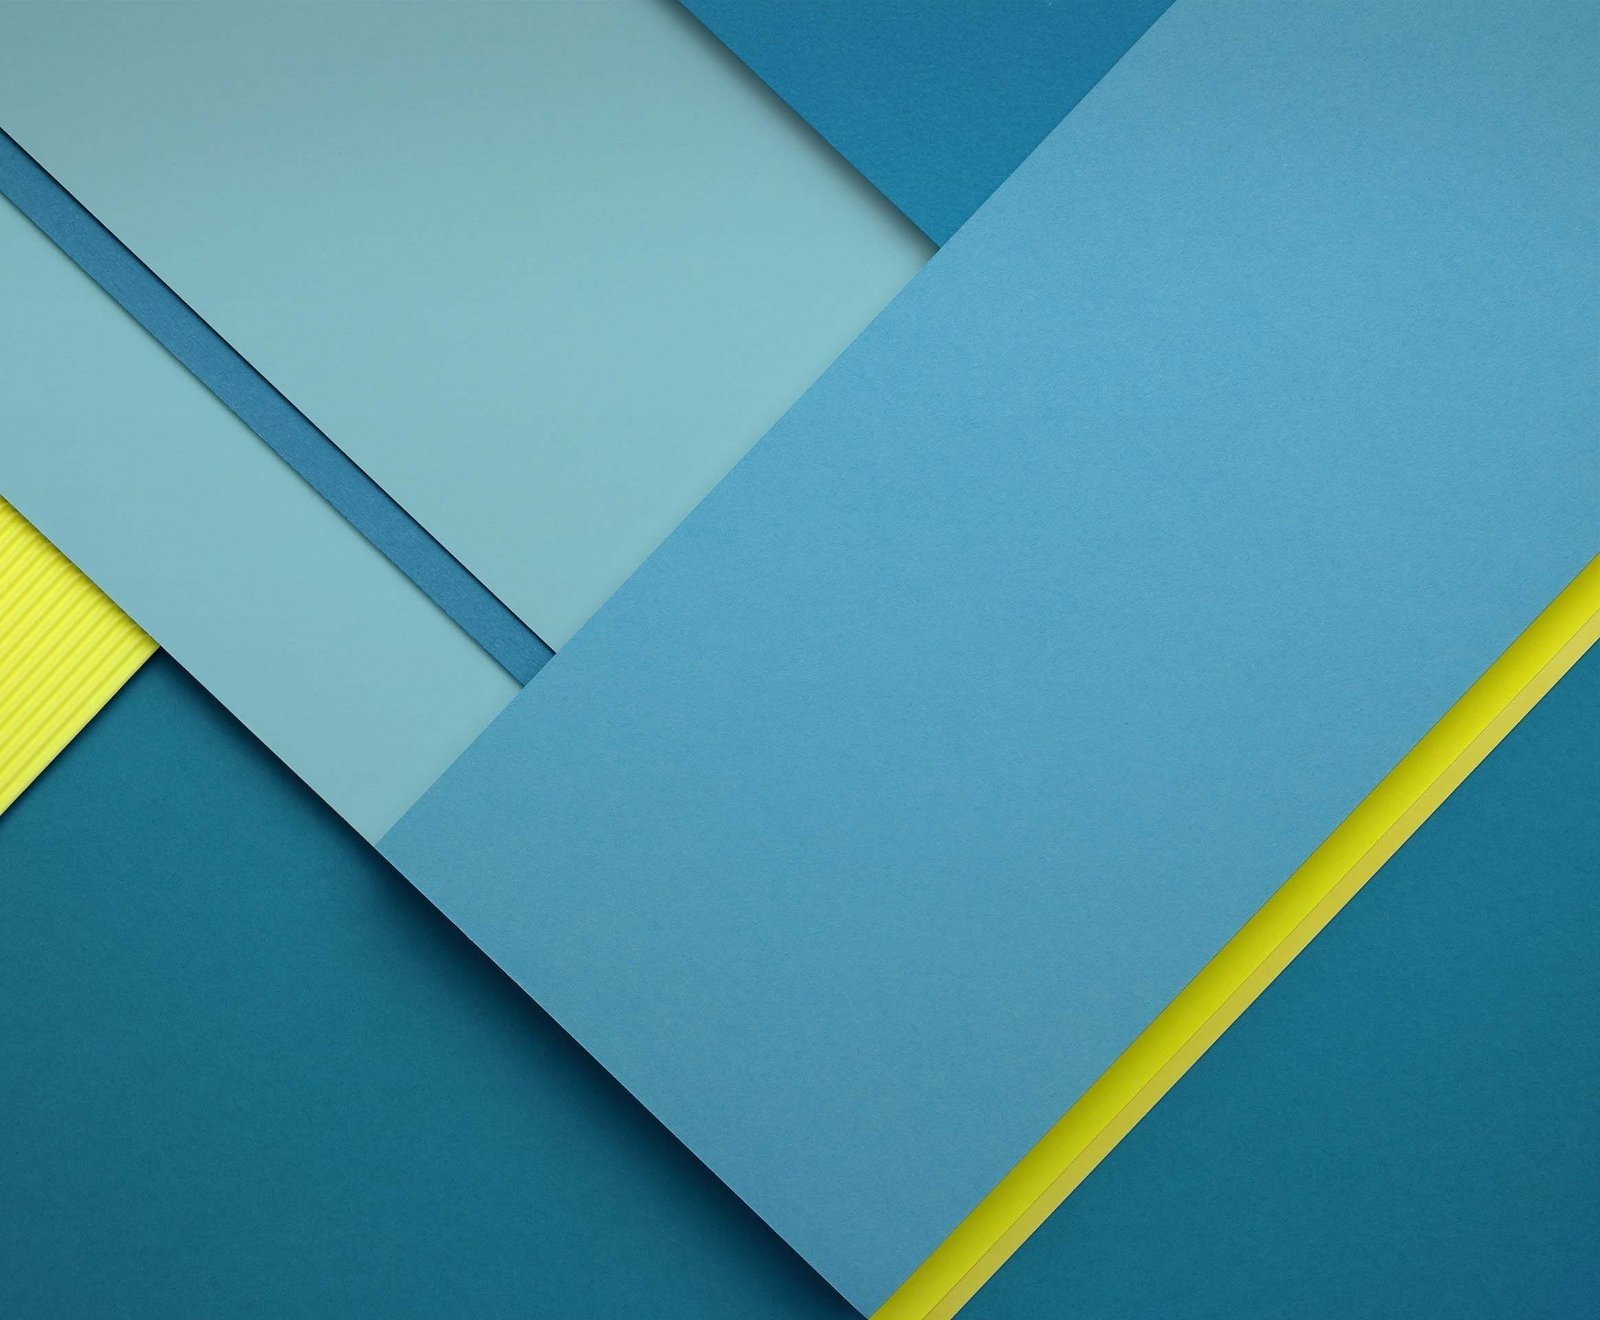 Wallpapers Android 5.0 Lollipop